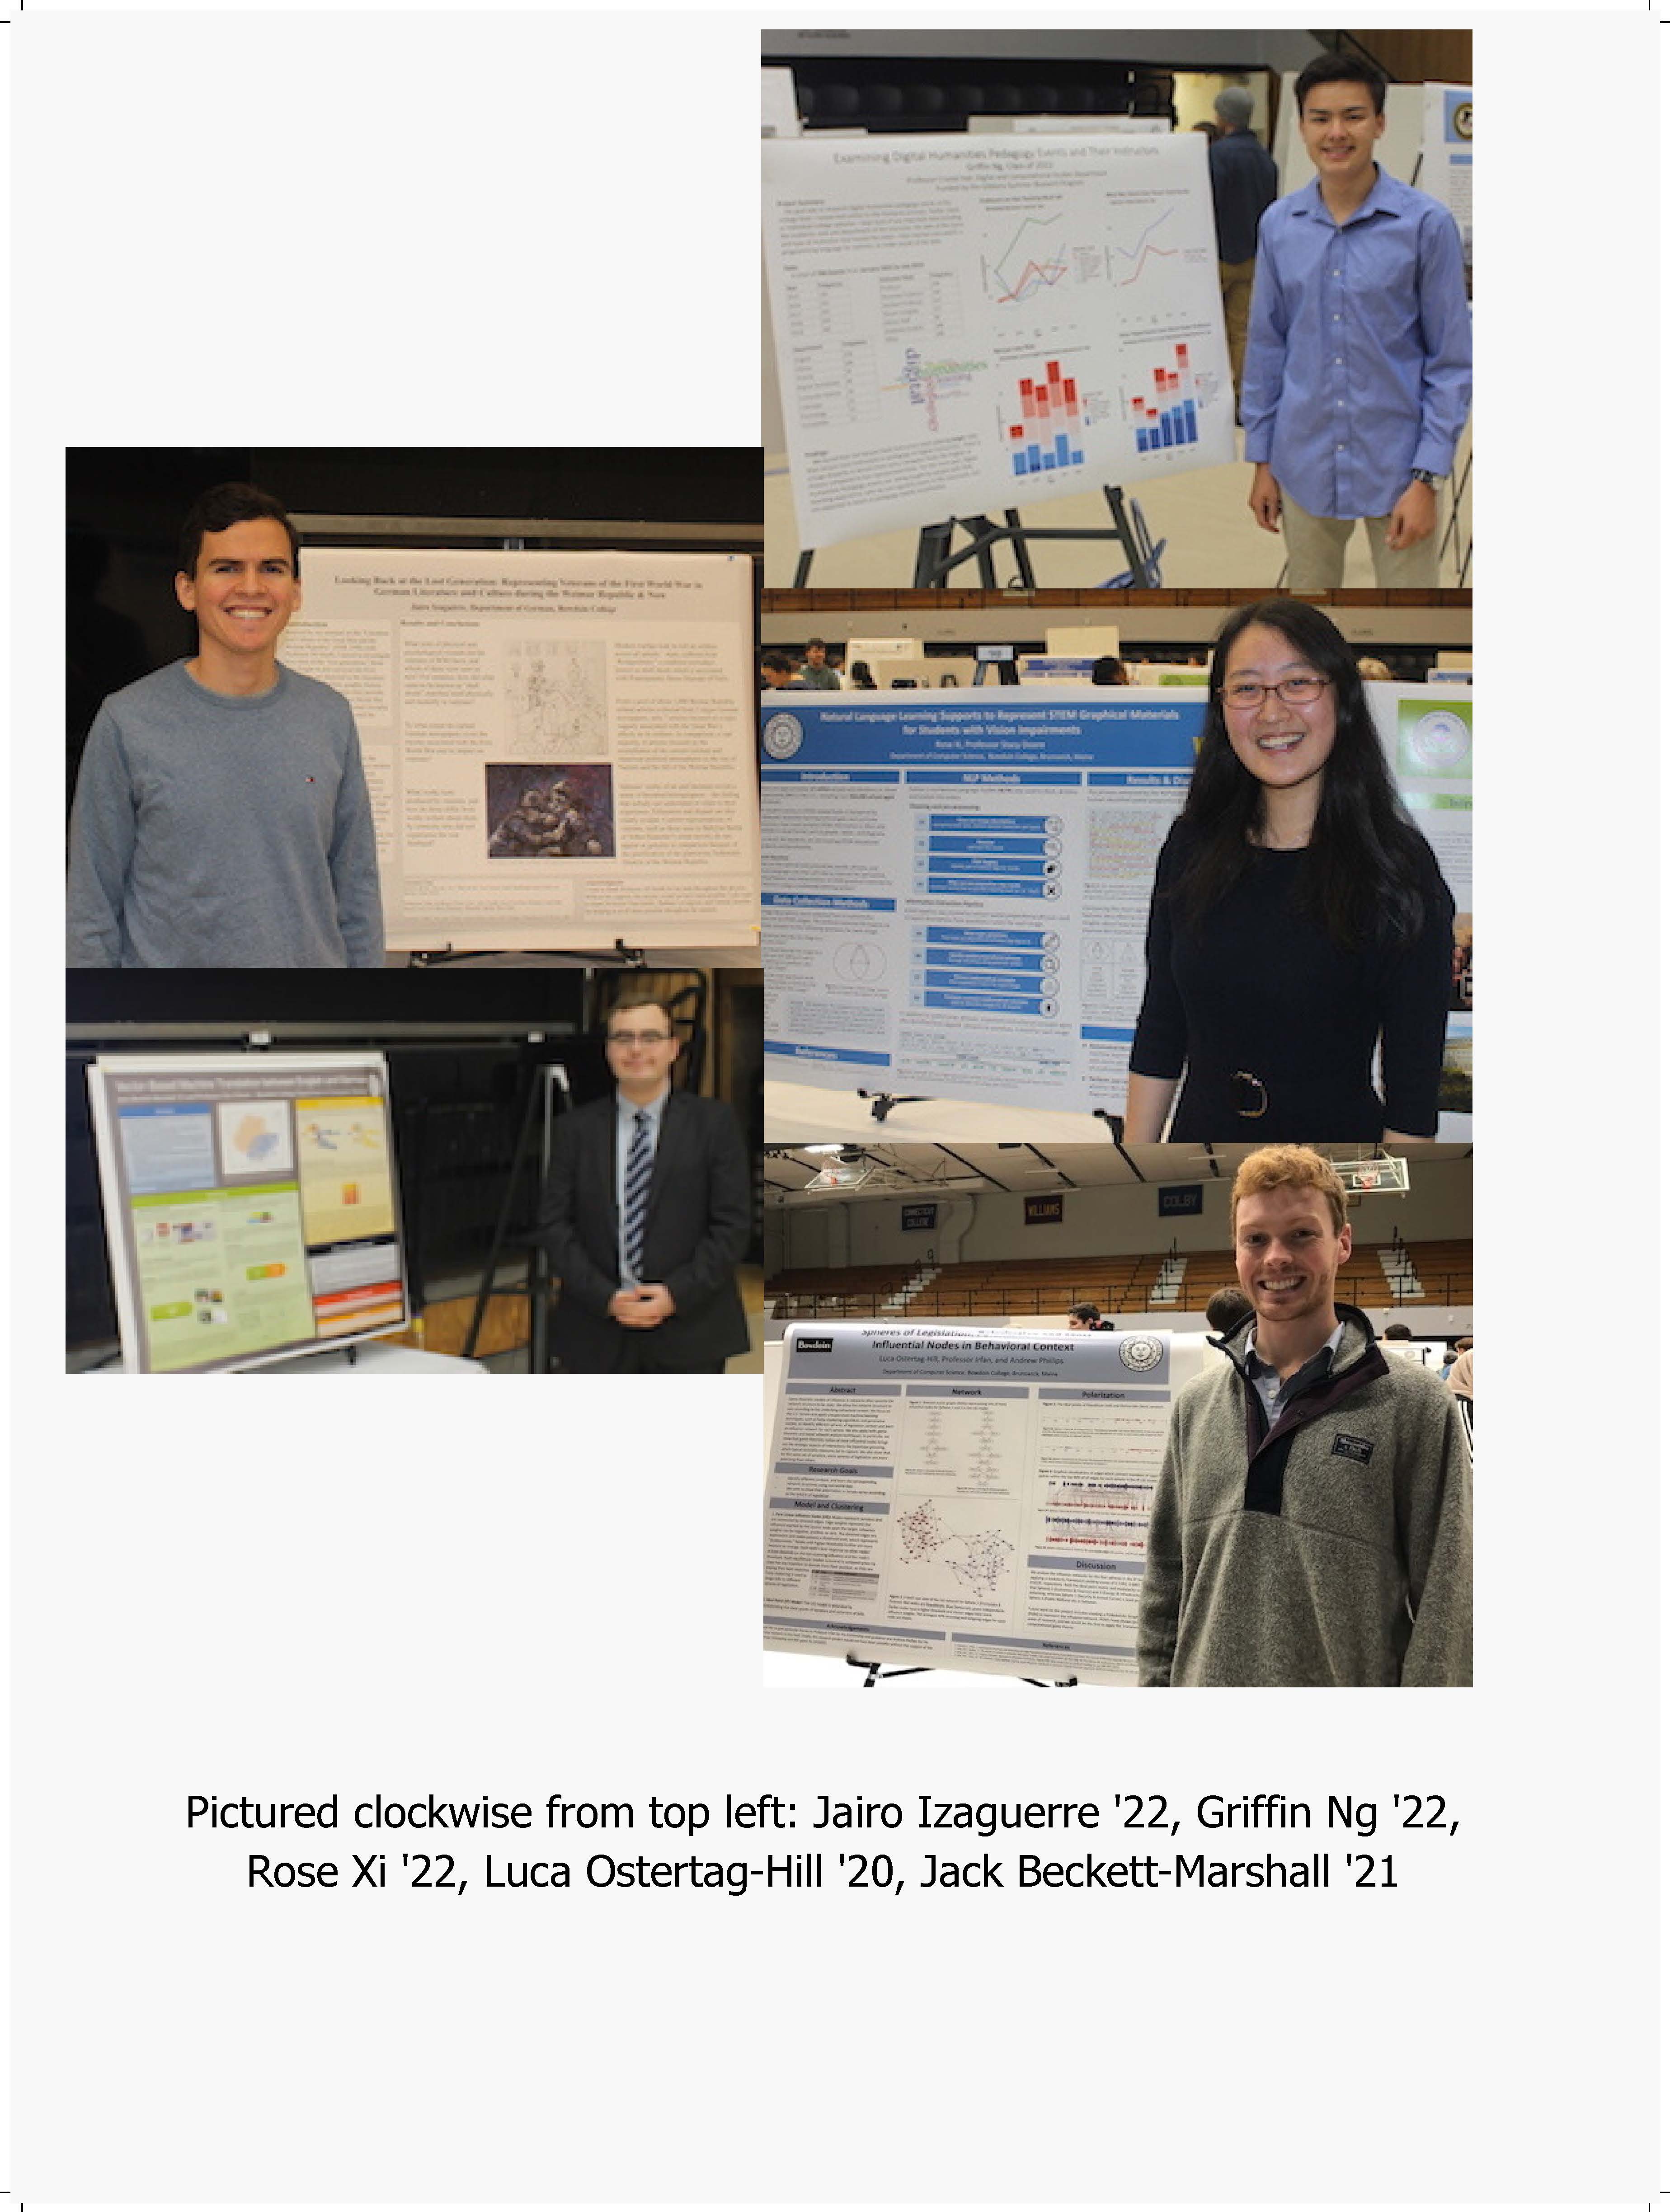 Students are pictured who participated in the 2019 President's Symposium with projects that contributed specifically to the mission of the DCS department. Pictured clockwise from top left: Jairo Izaguerre '22, Griffin Ng '22, Rose Xi '22, Luca Ostertag-Hill '20, Jack Beckett-Marshall '21 